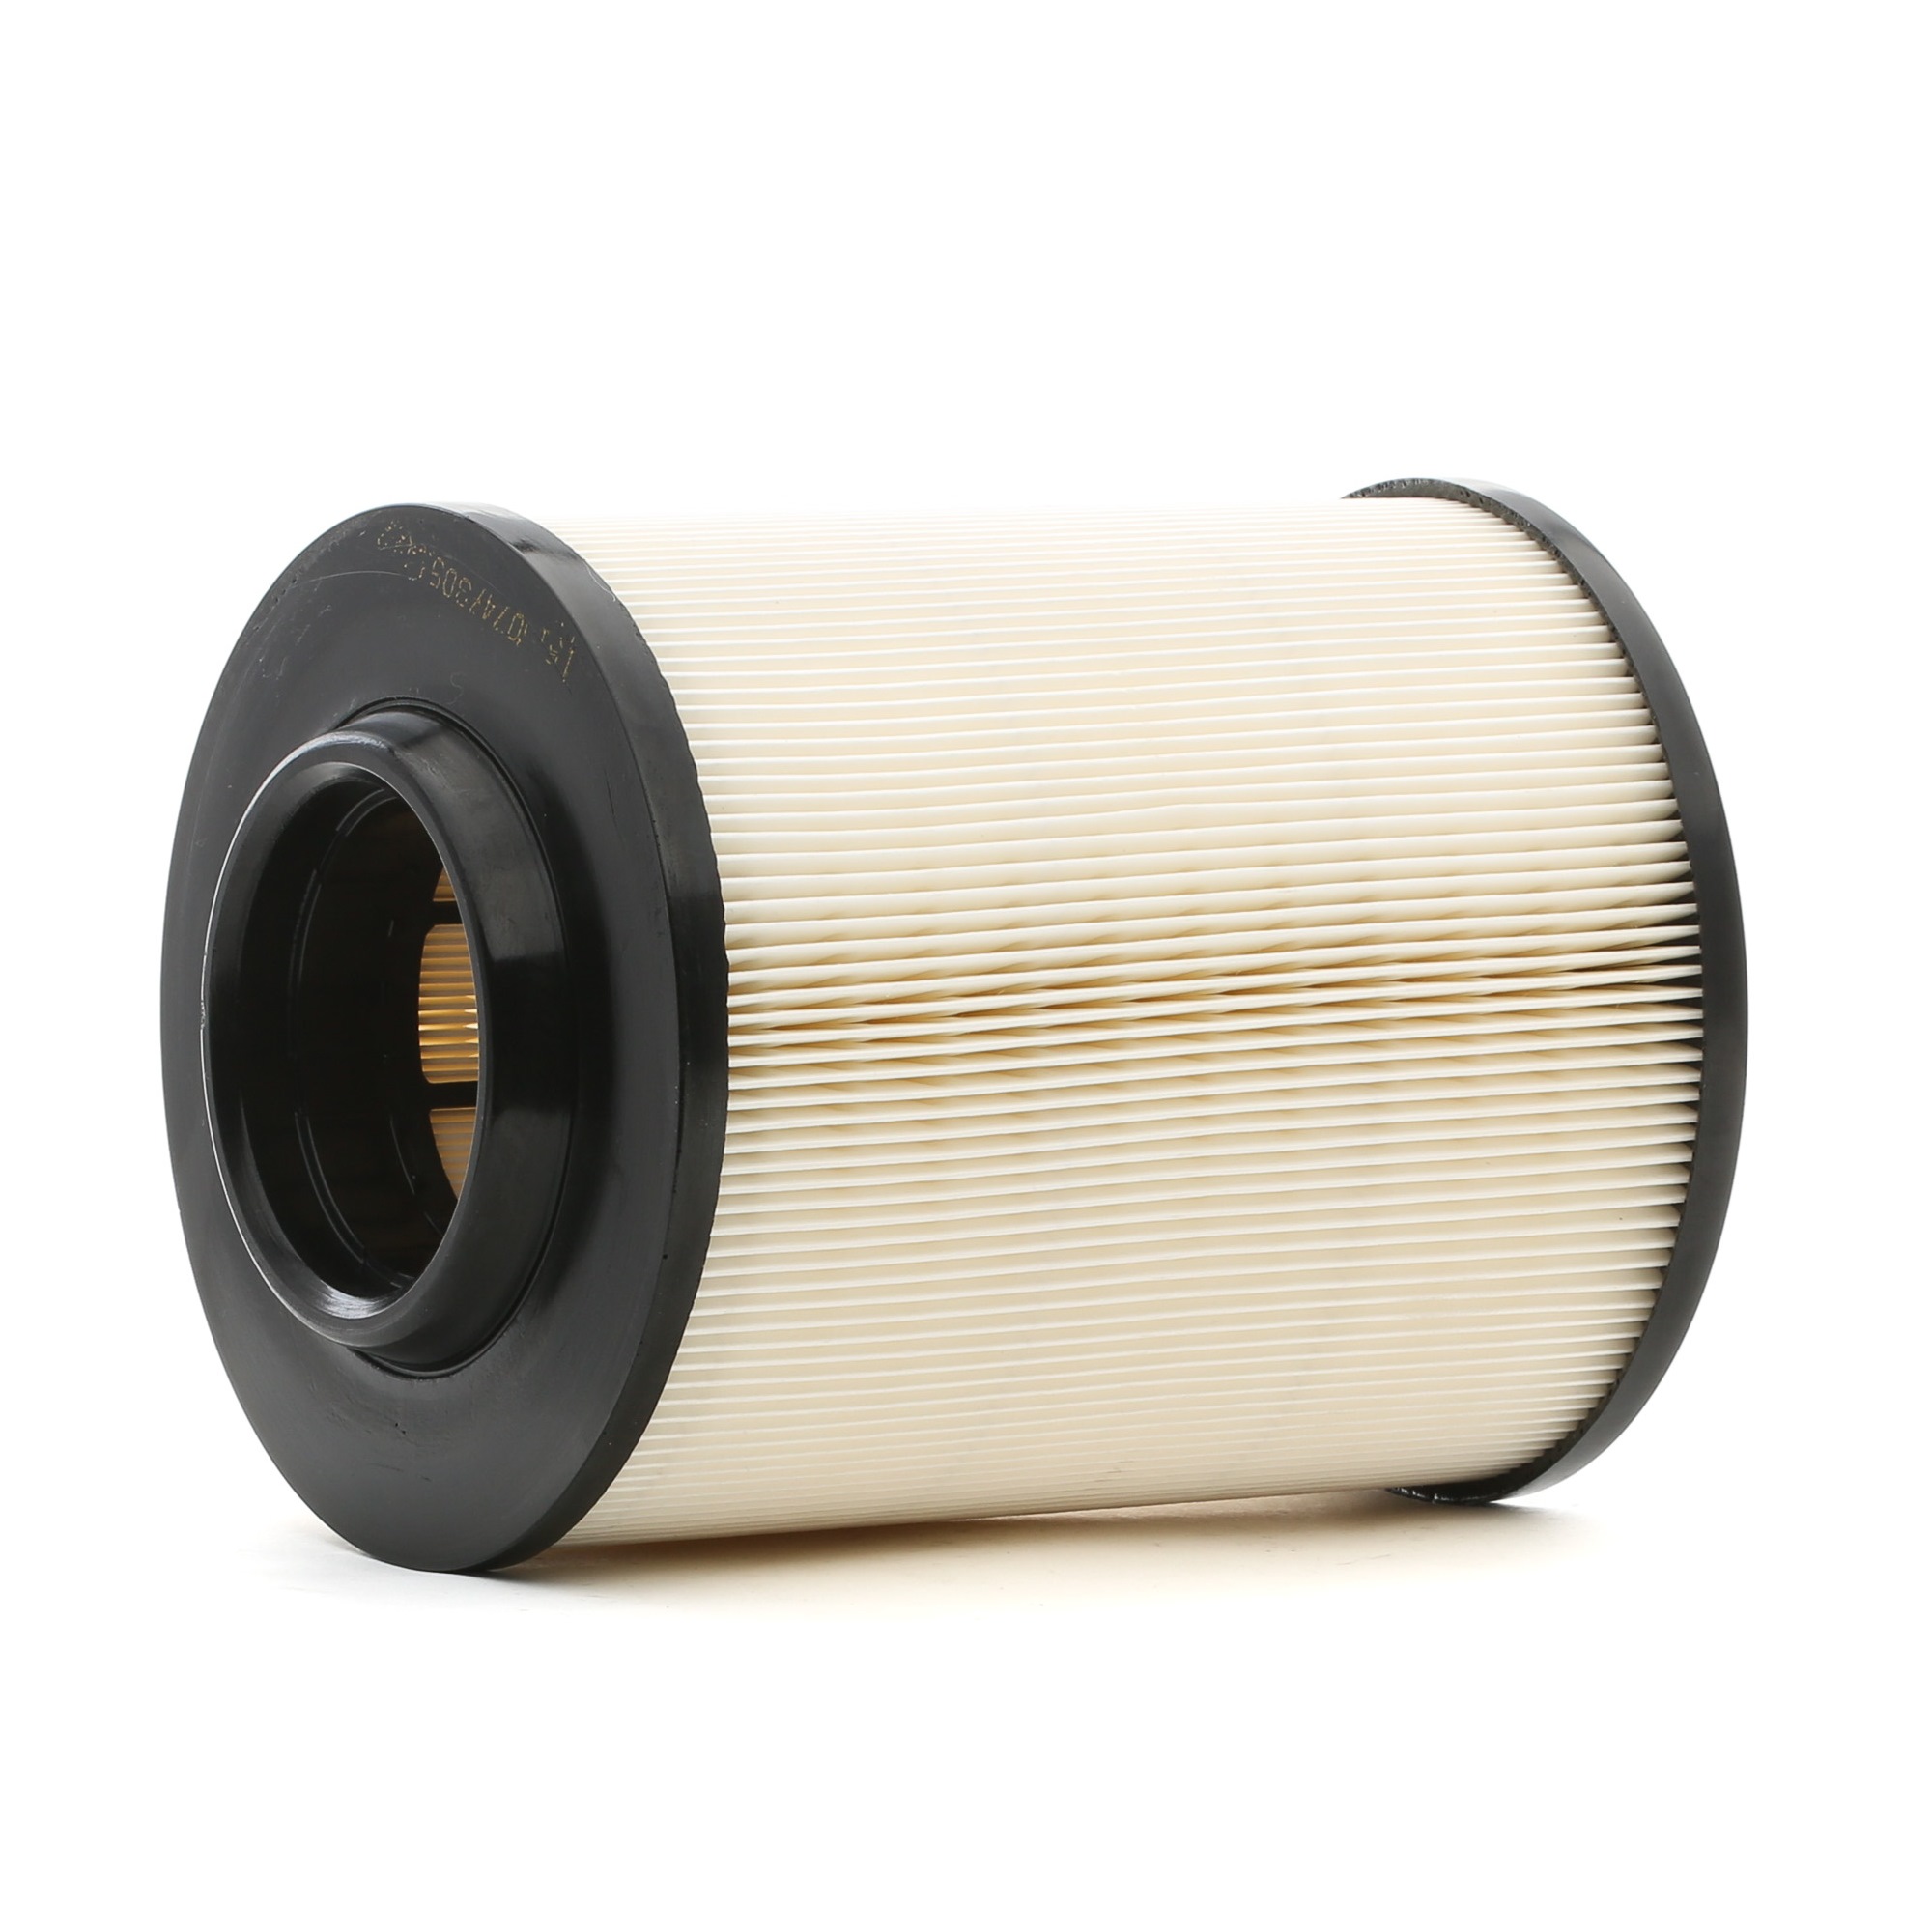 RIDEX 208mm, 158mm, Cylindrical, round, Filter Insert Height: 208mm Engine air filter 8A0410 buy